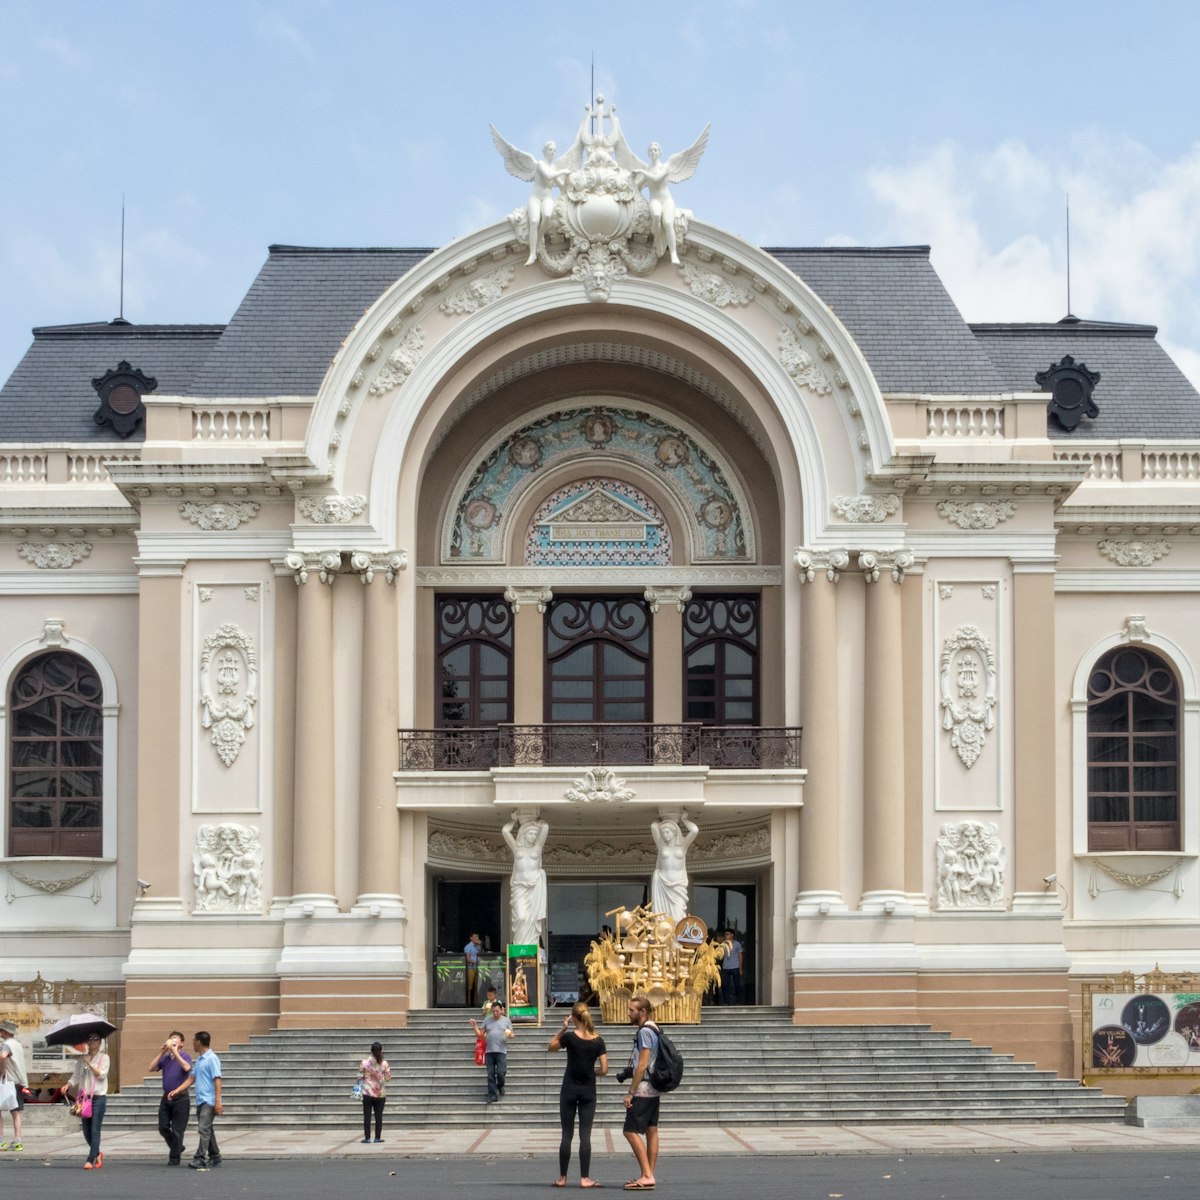 The Municipal Opera House, also known as Municipal Theatre, is a prime example of French Colonial architecture.